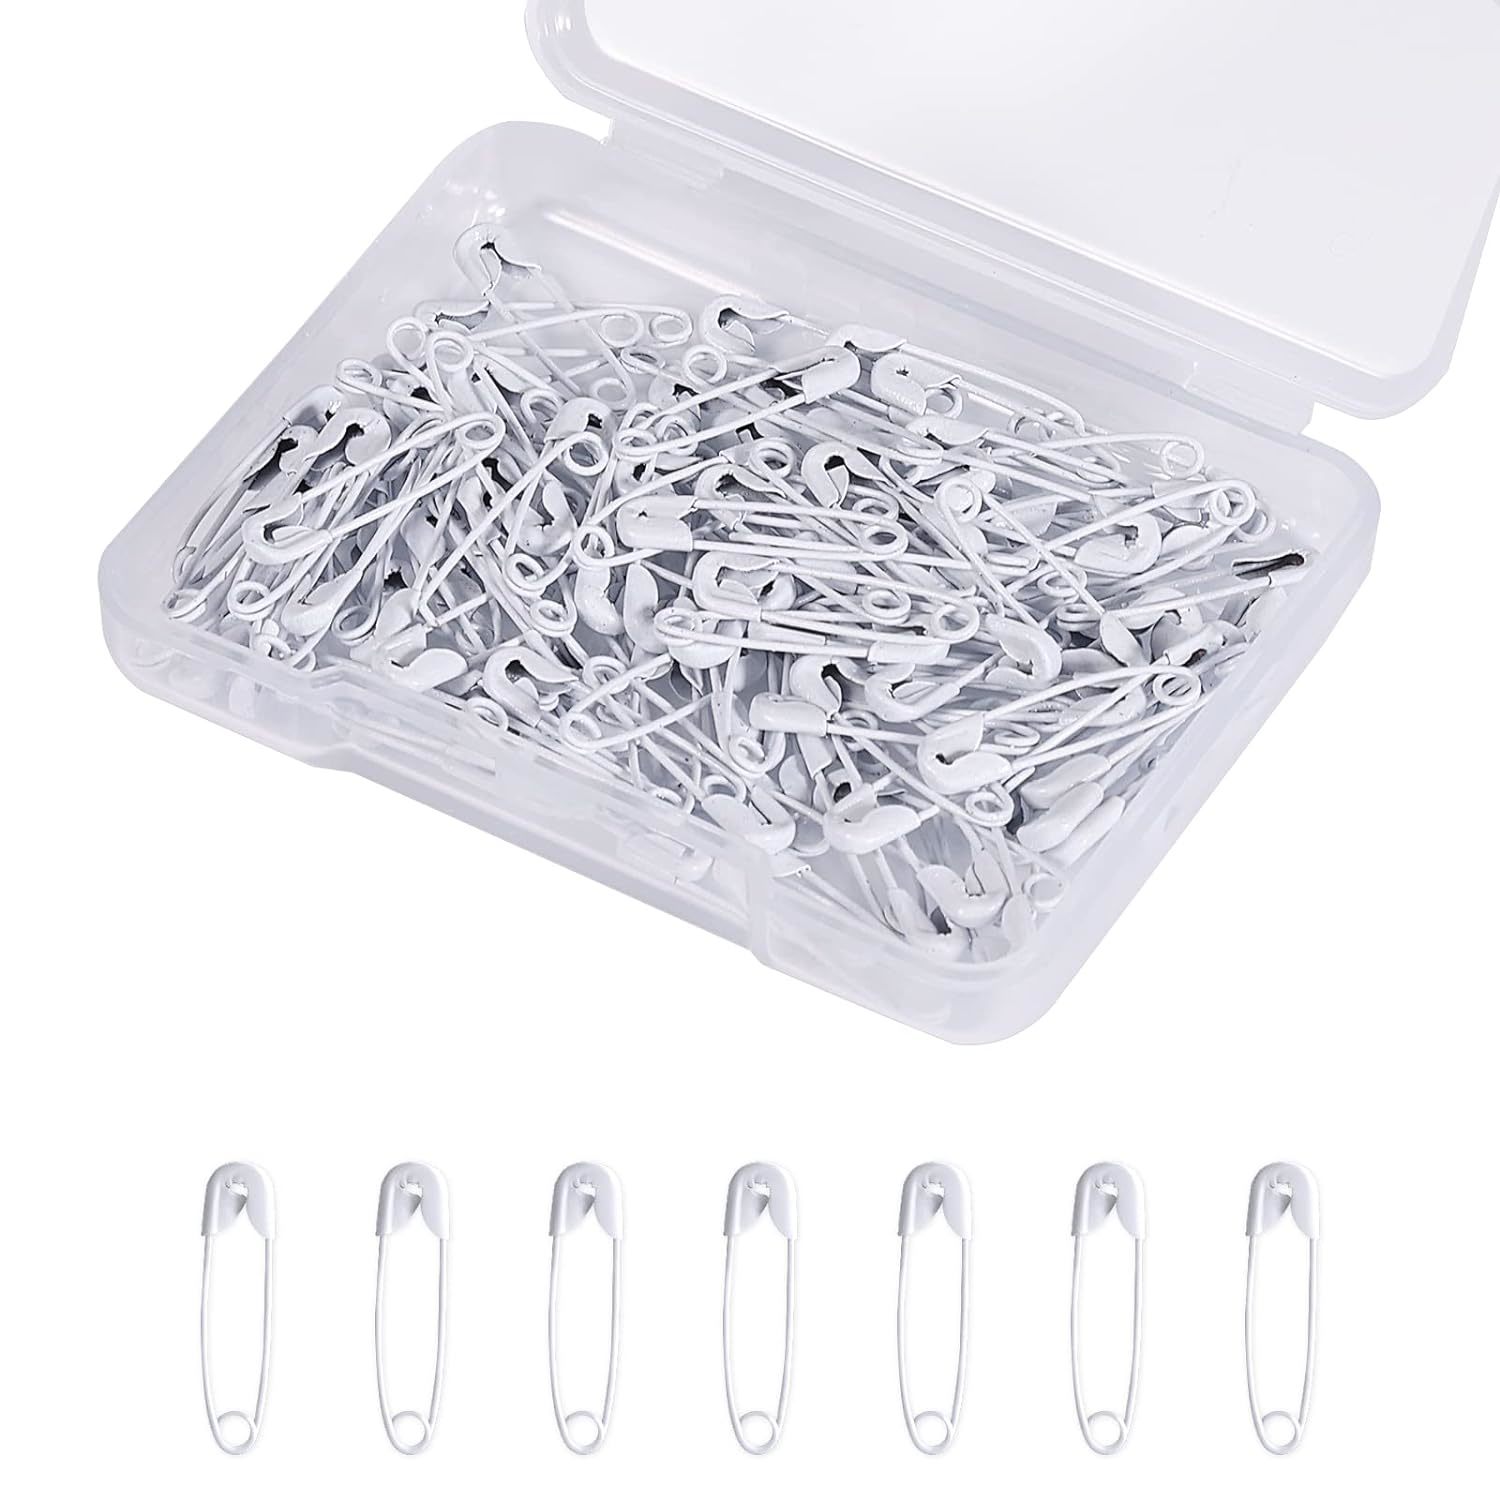 5 Inch Large Safety Pins For Clothes Big Safety Pins Heavy Giant